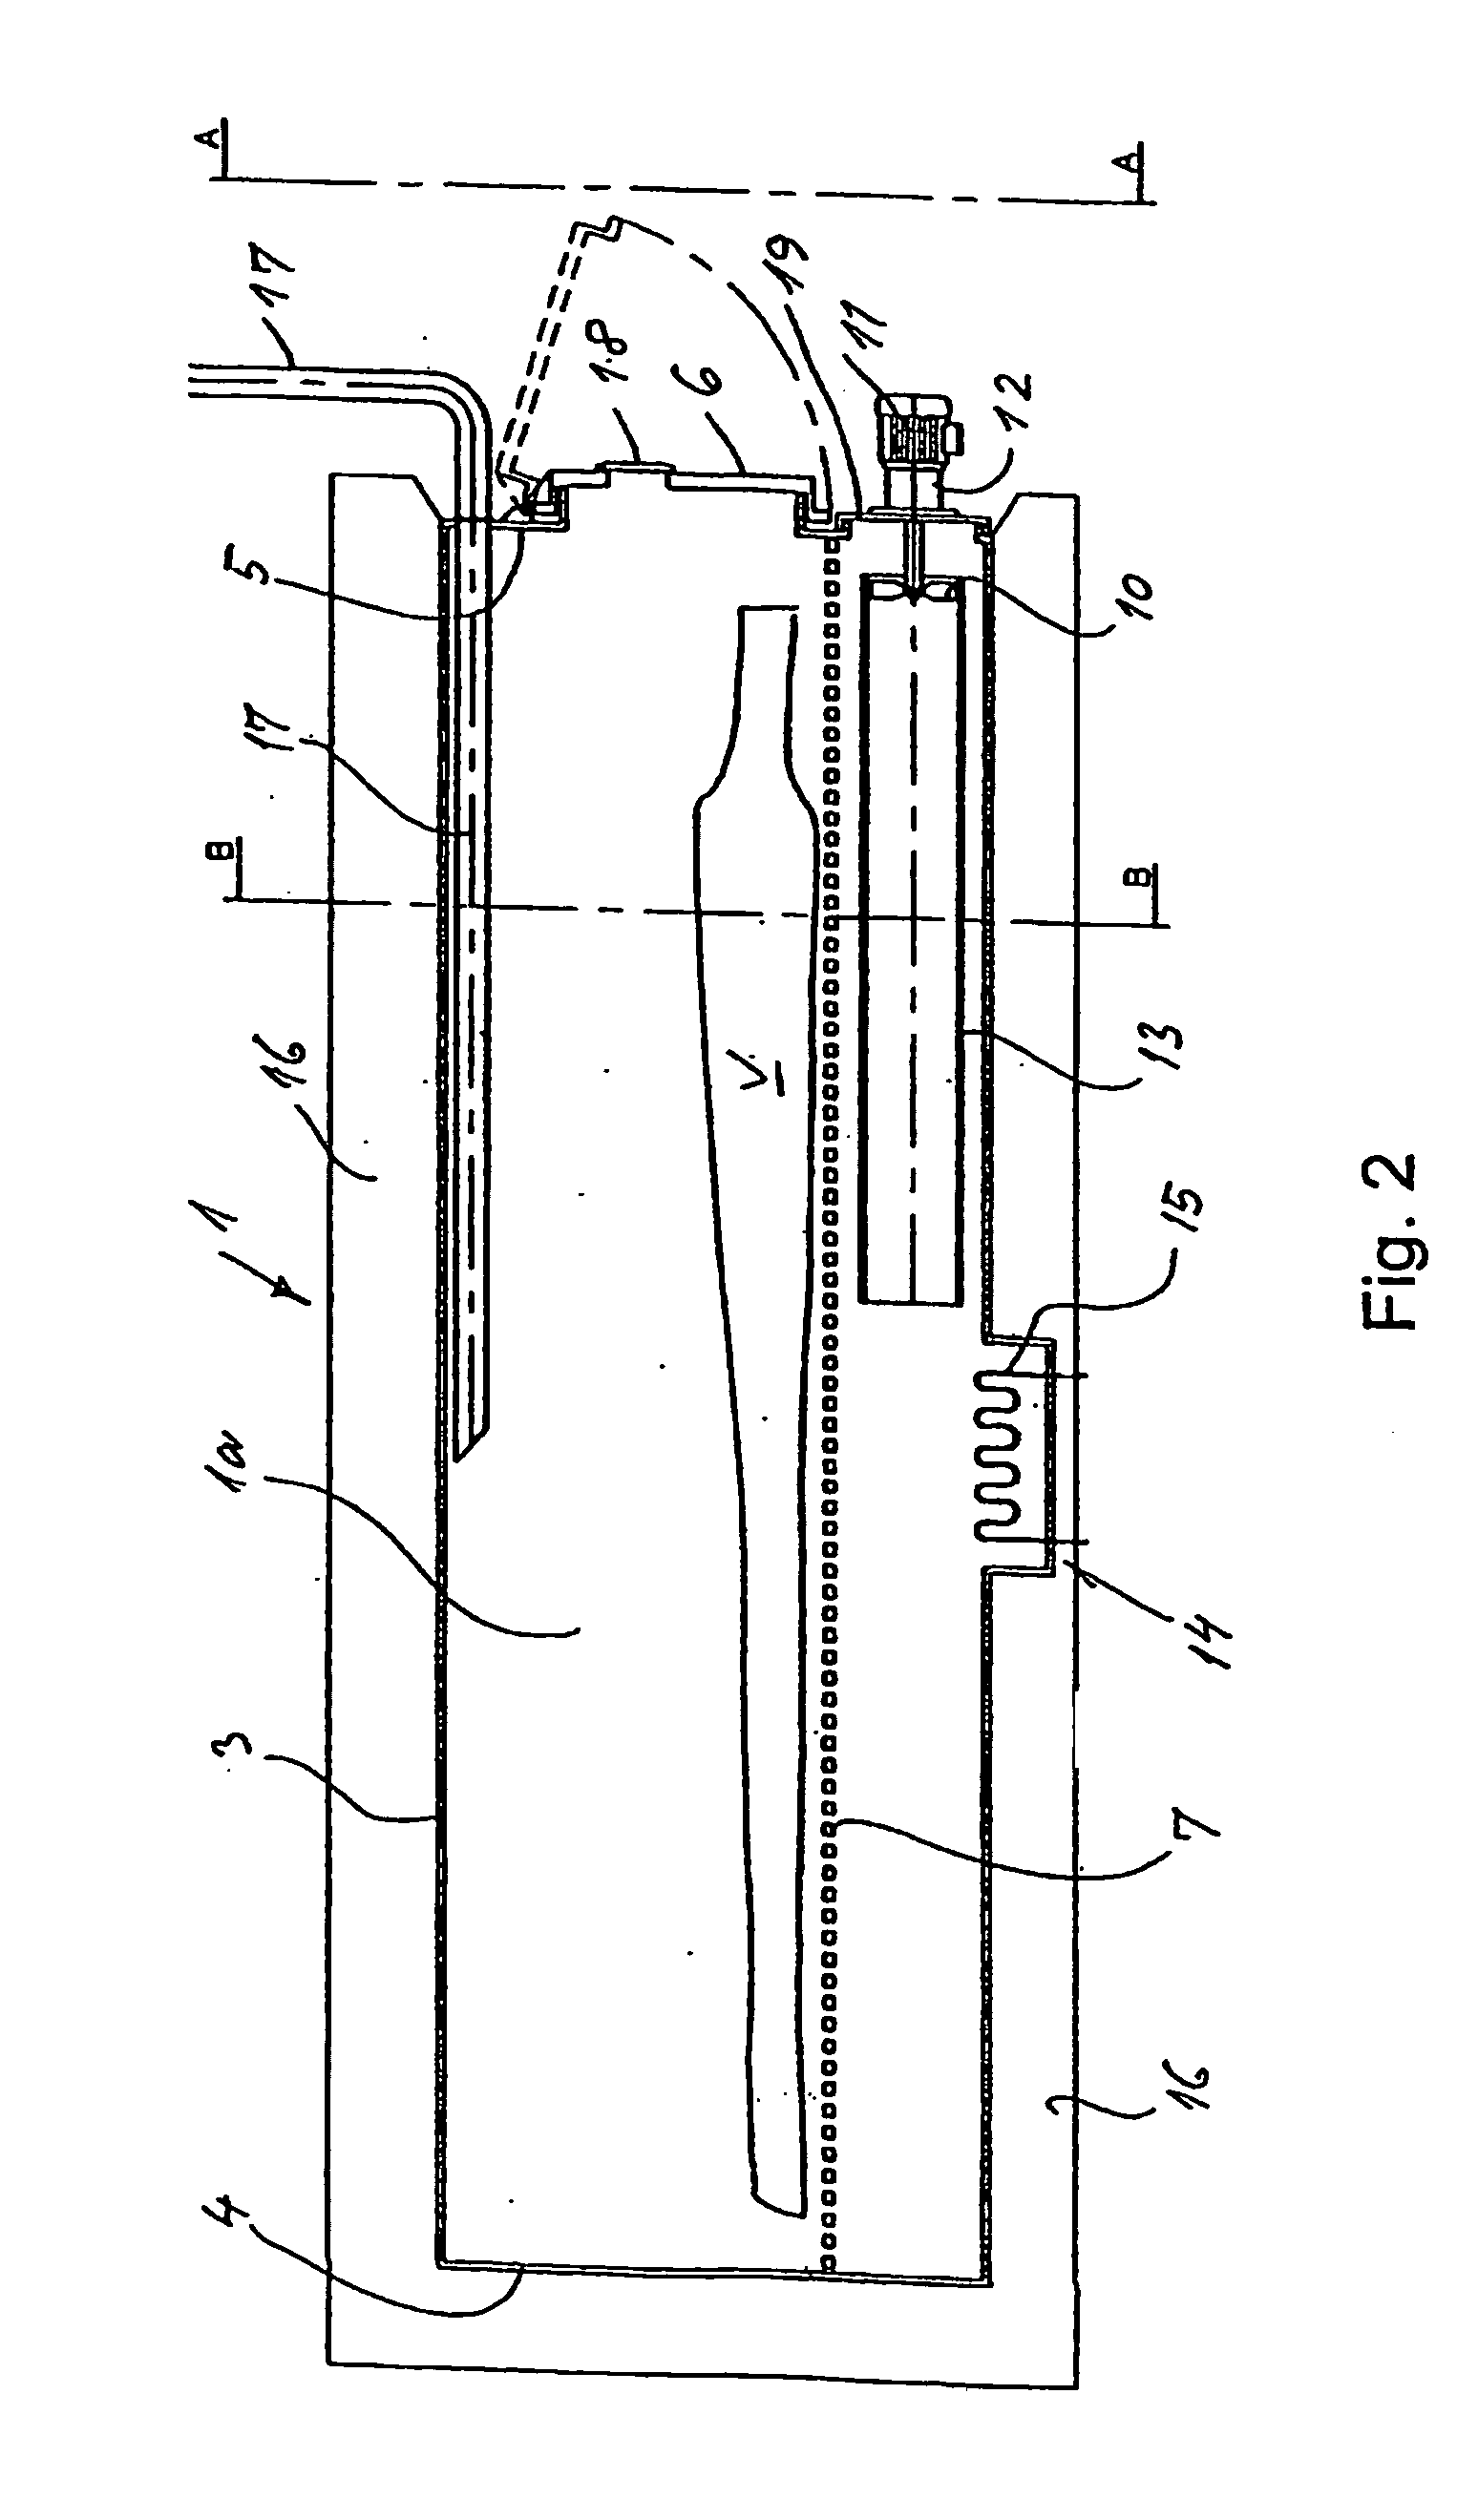 Method for recycling composite materials